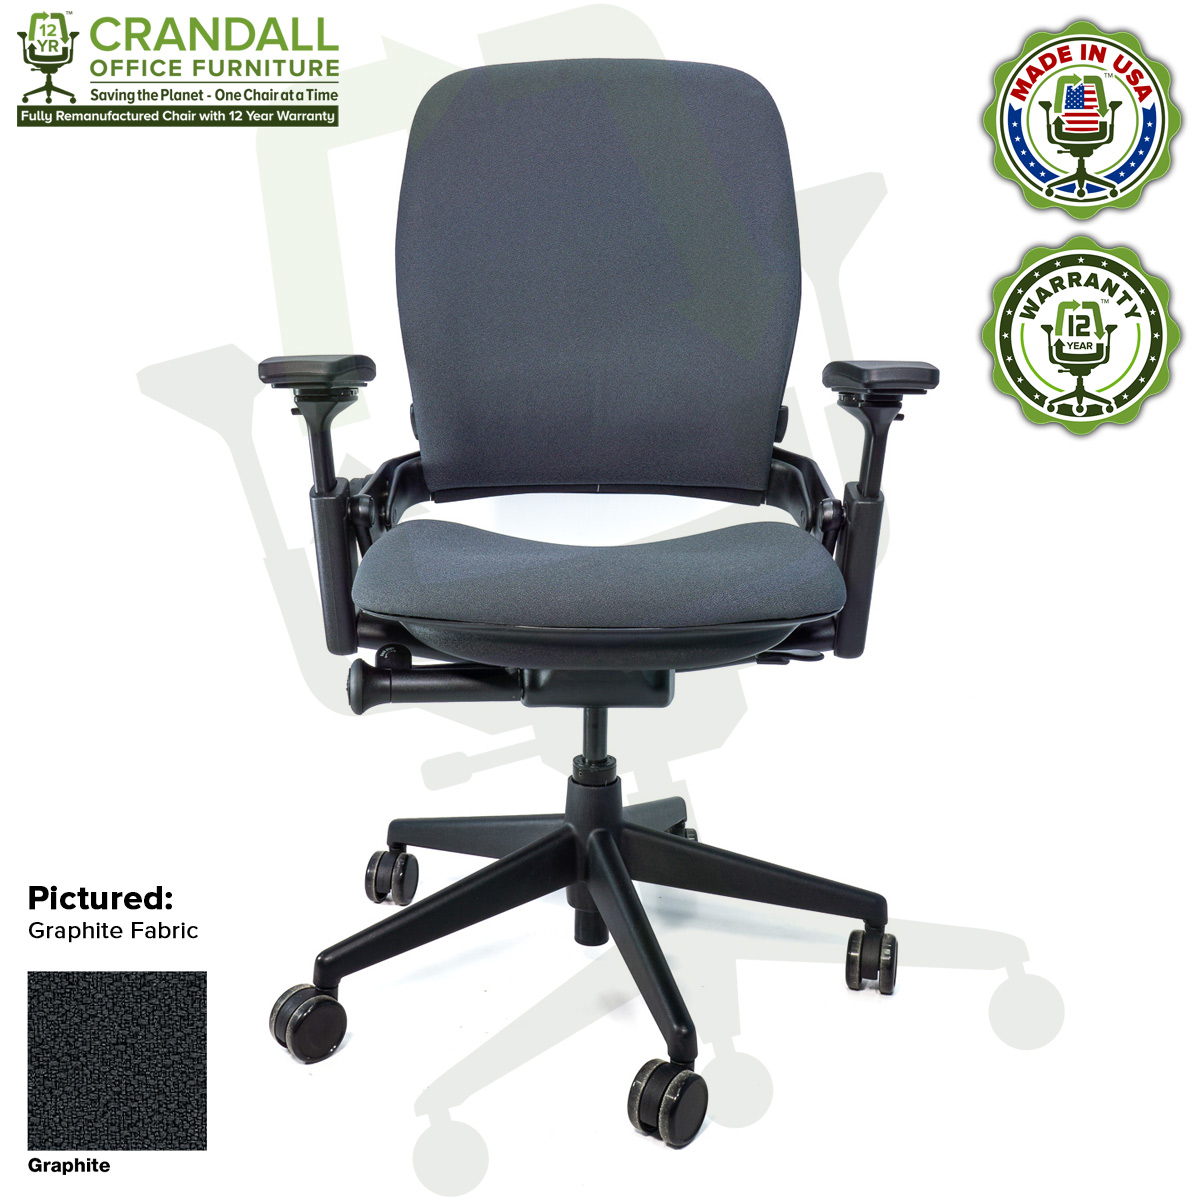 Crandall-Office-Remanufactured-Steelcase-462-V2-Leap-Chair-Color-Graphite